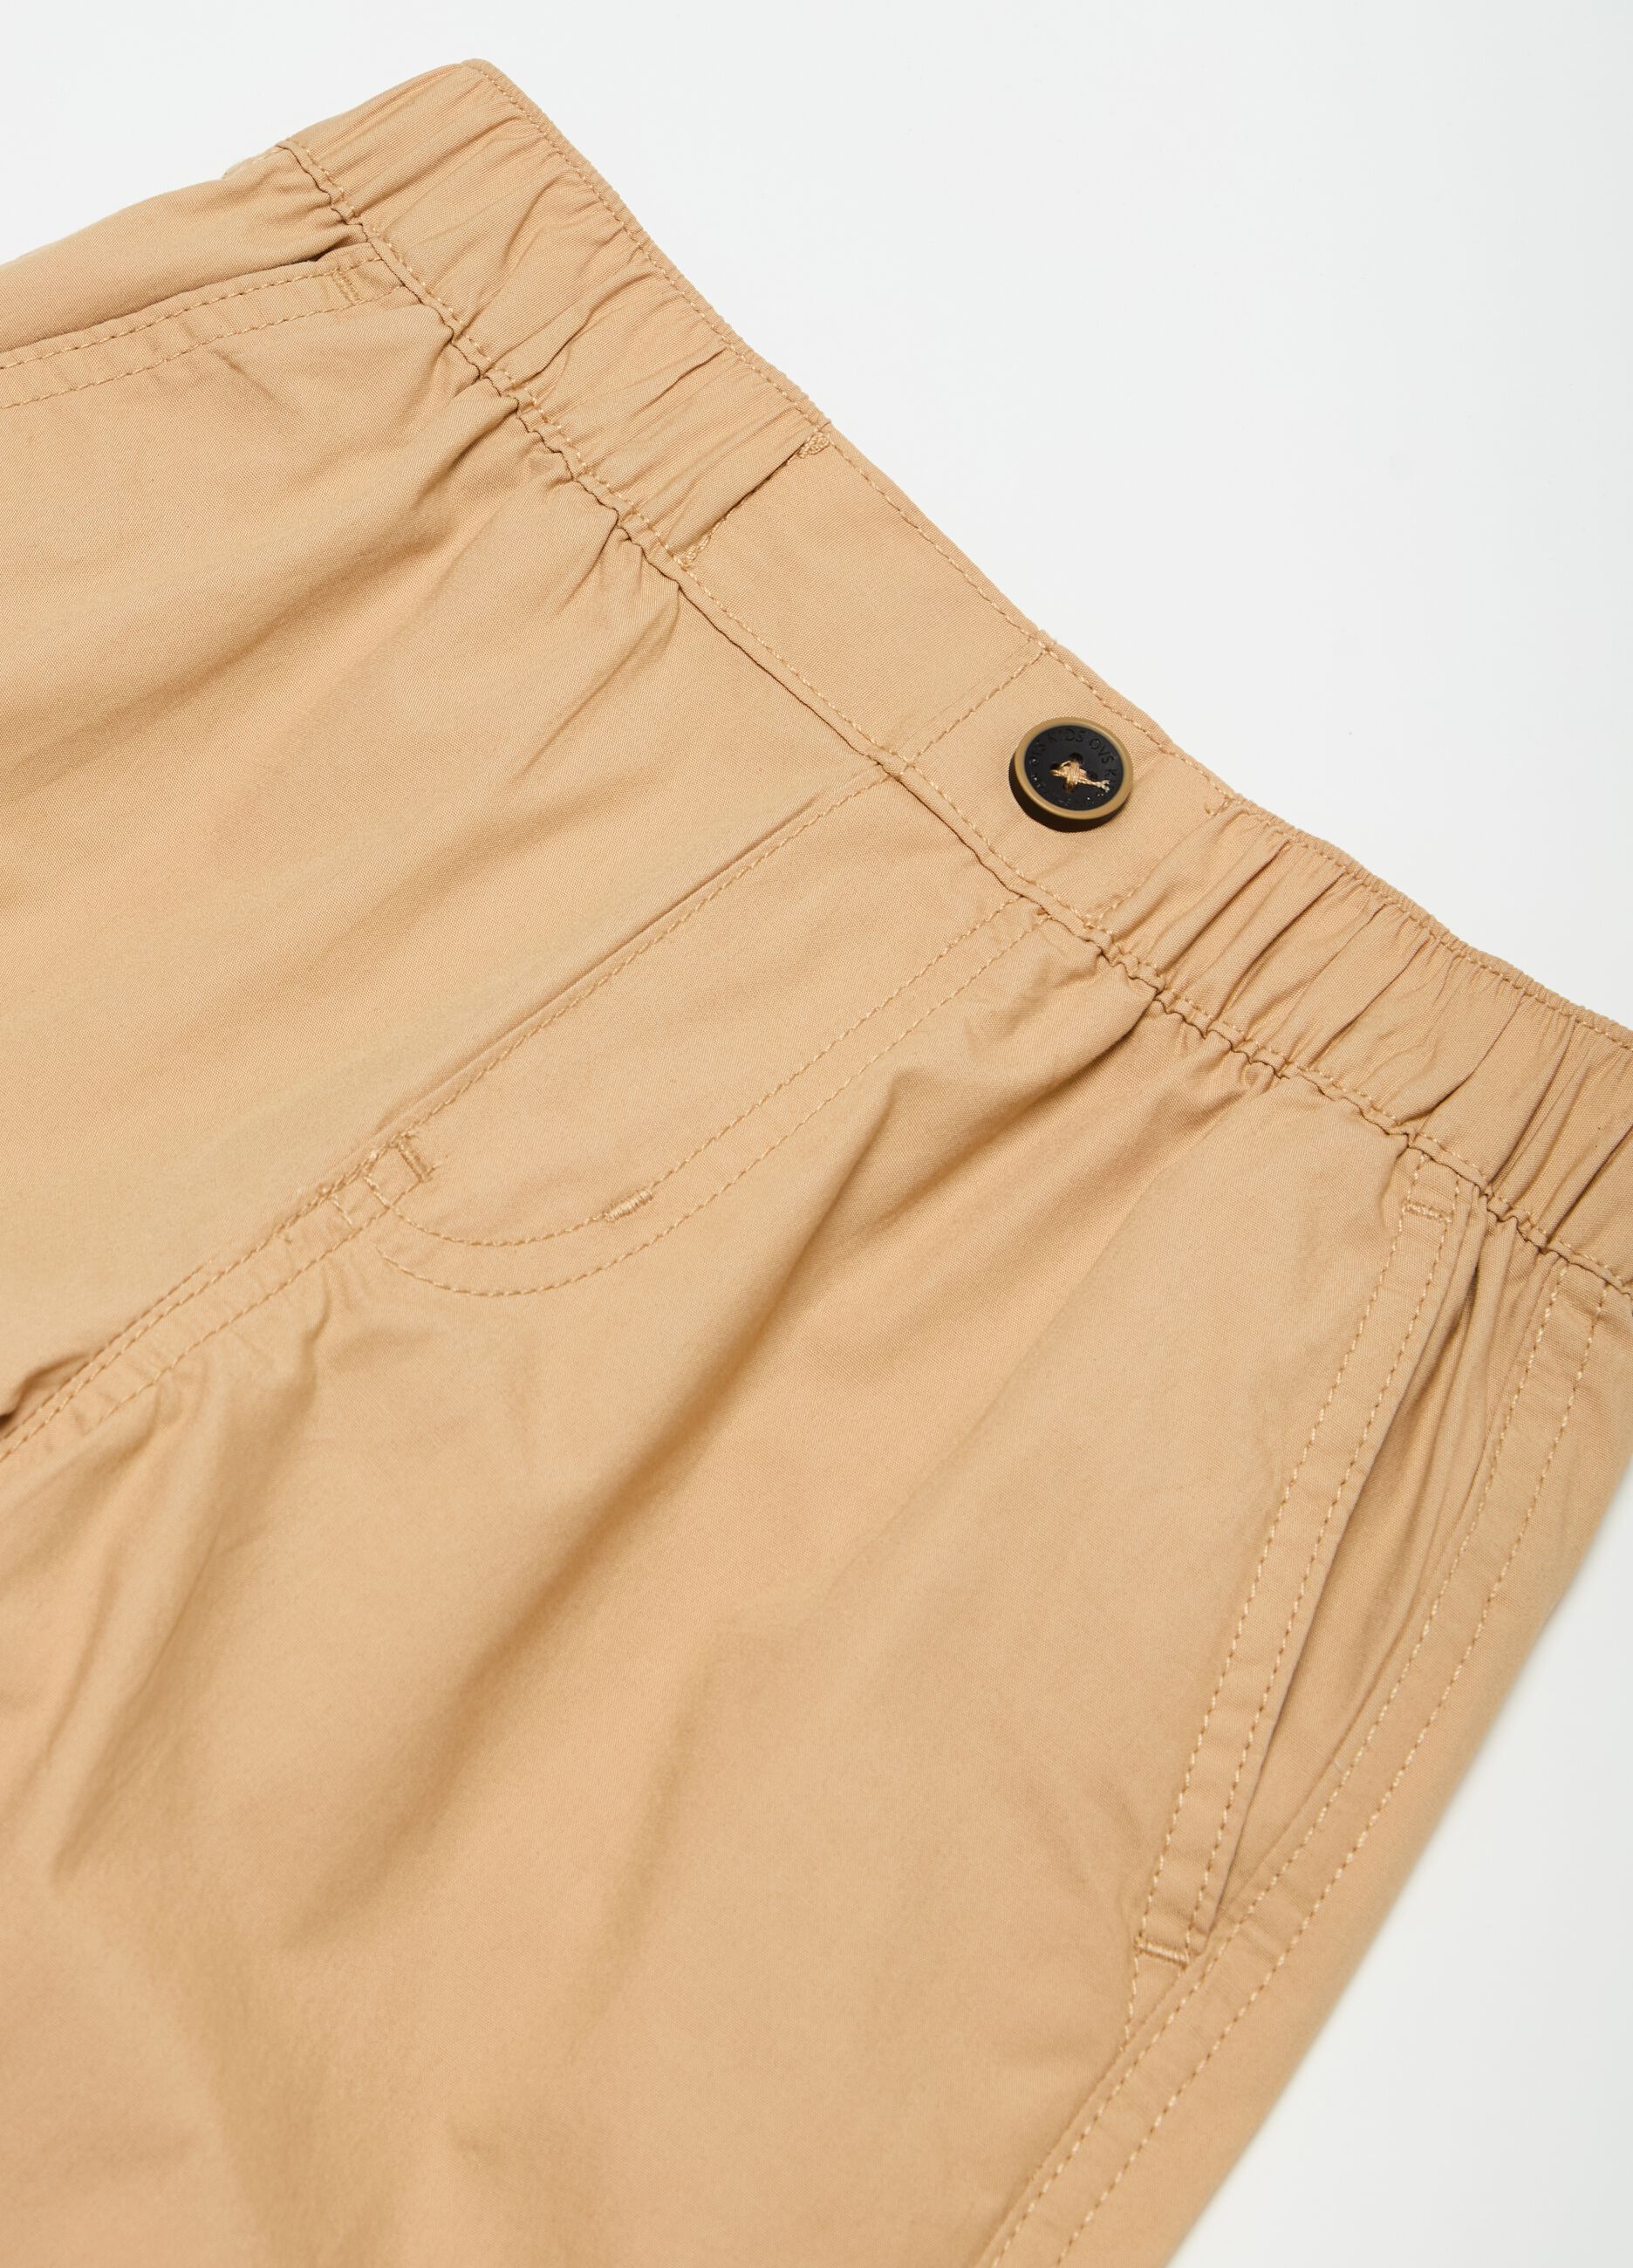 Pull-on Bermuda shorts in cotton